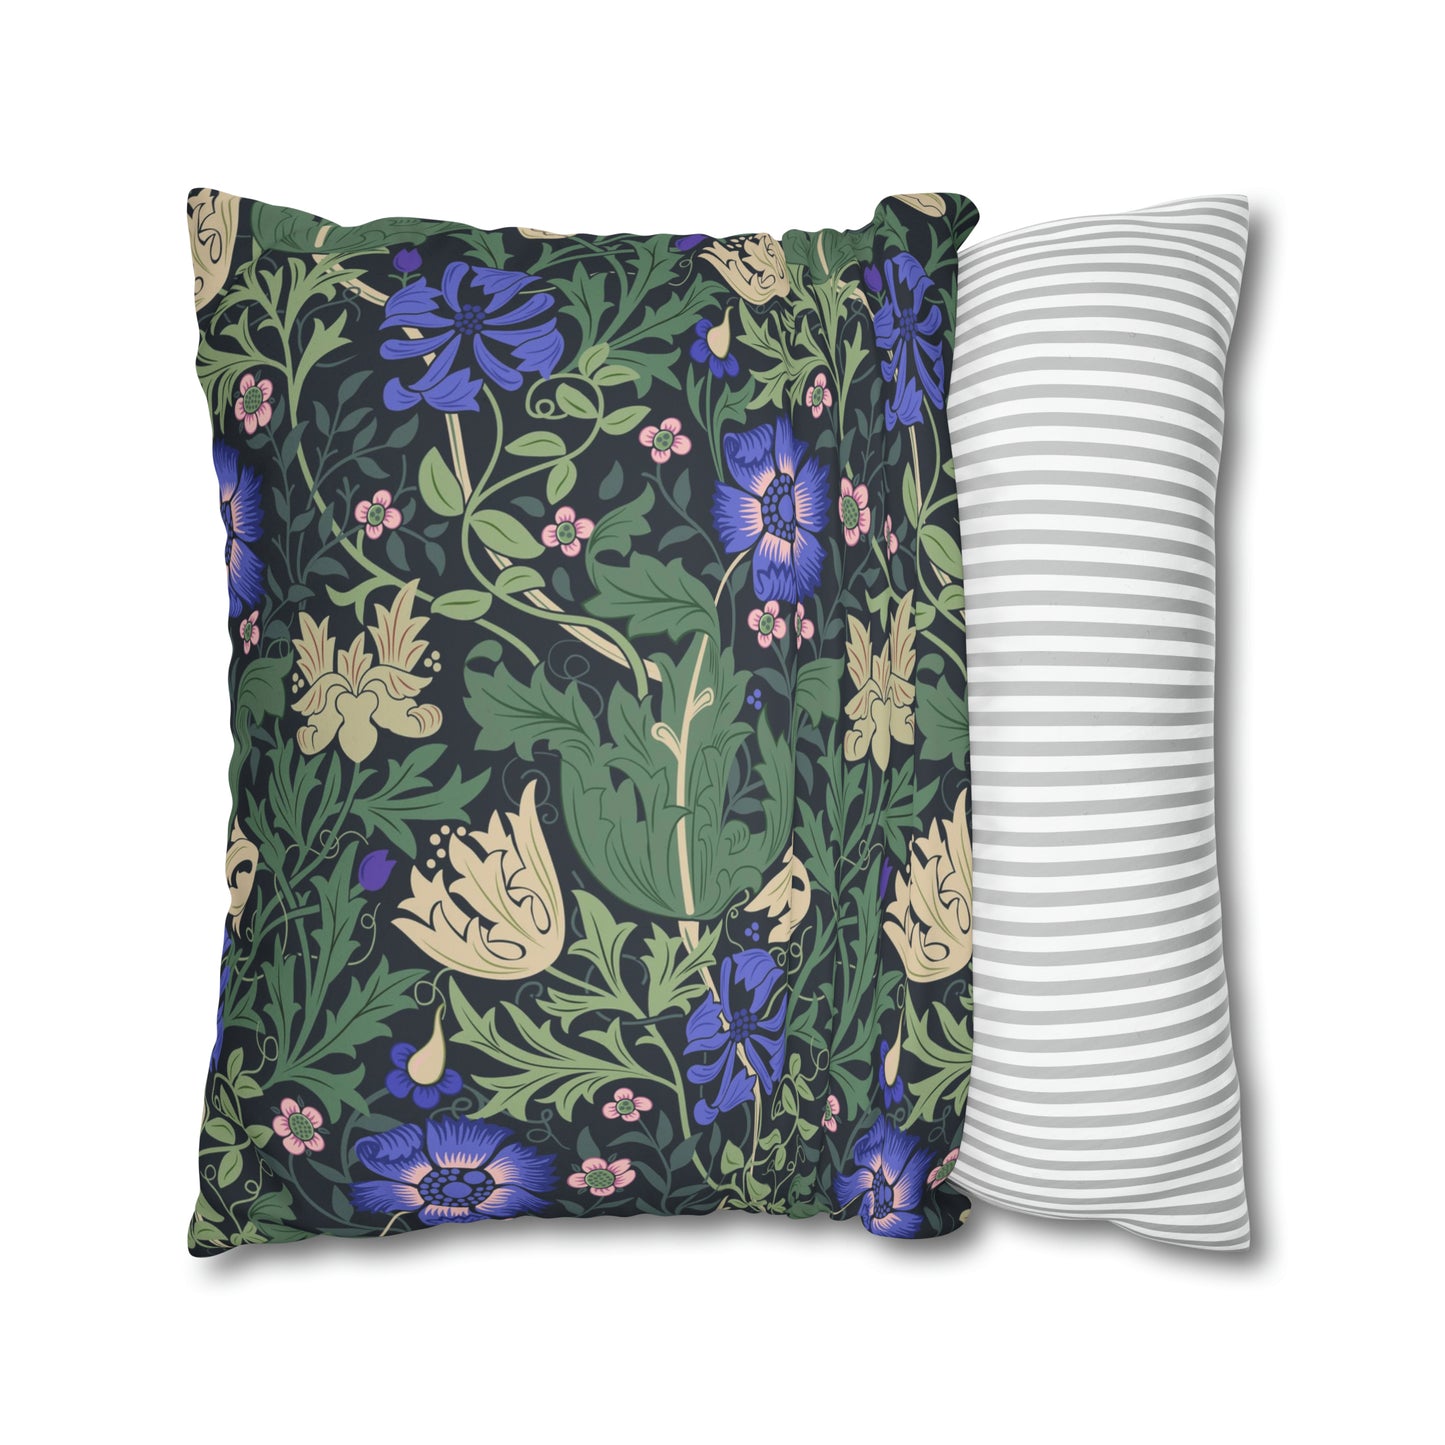 William Morris & Co Faux Suede Cushion Covers - Compton Collection (Bluebell Cottage)